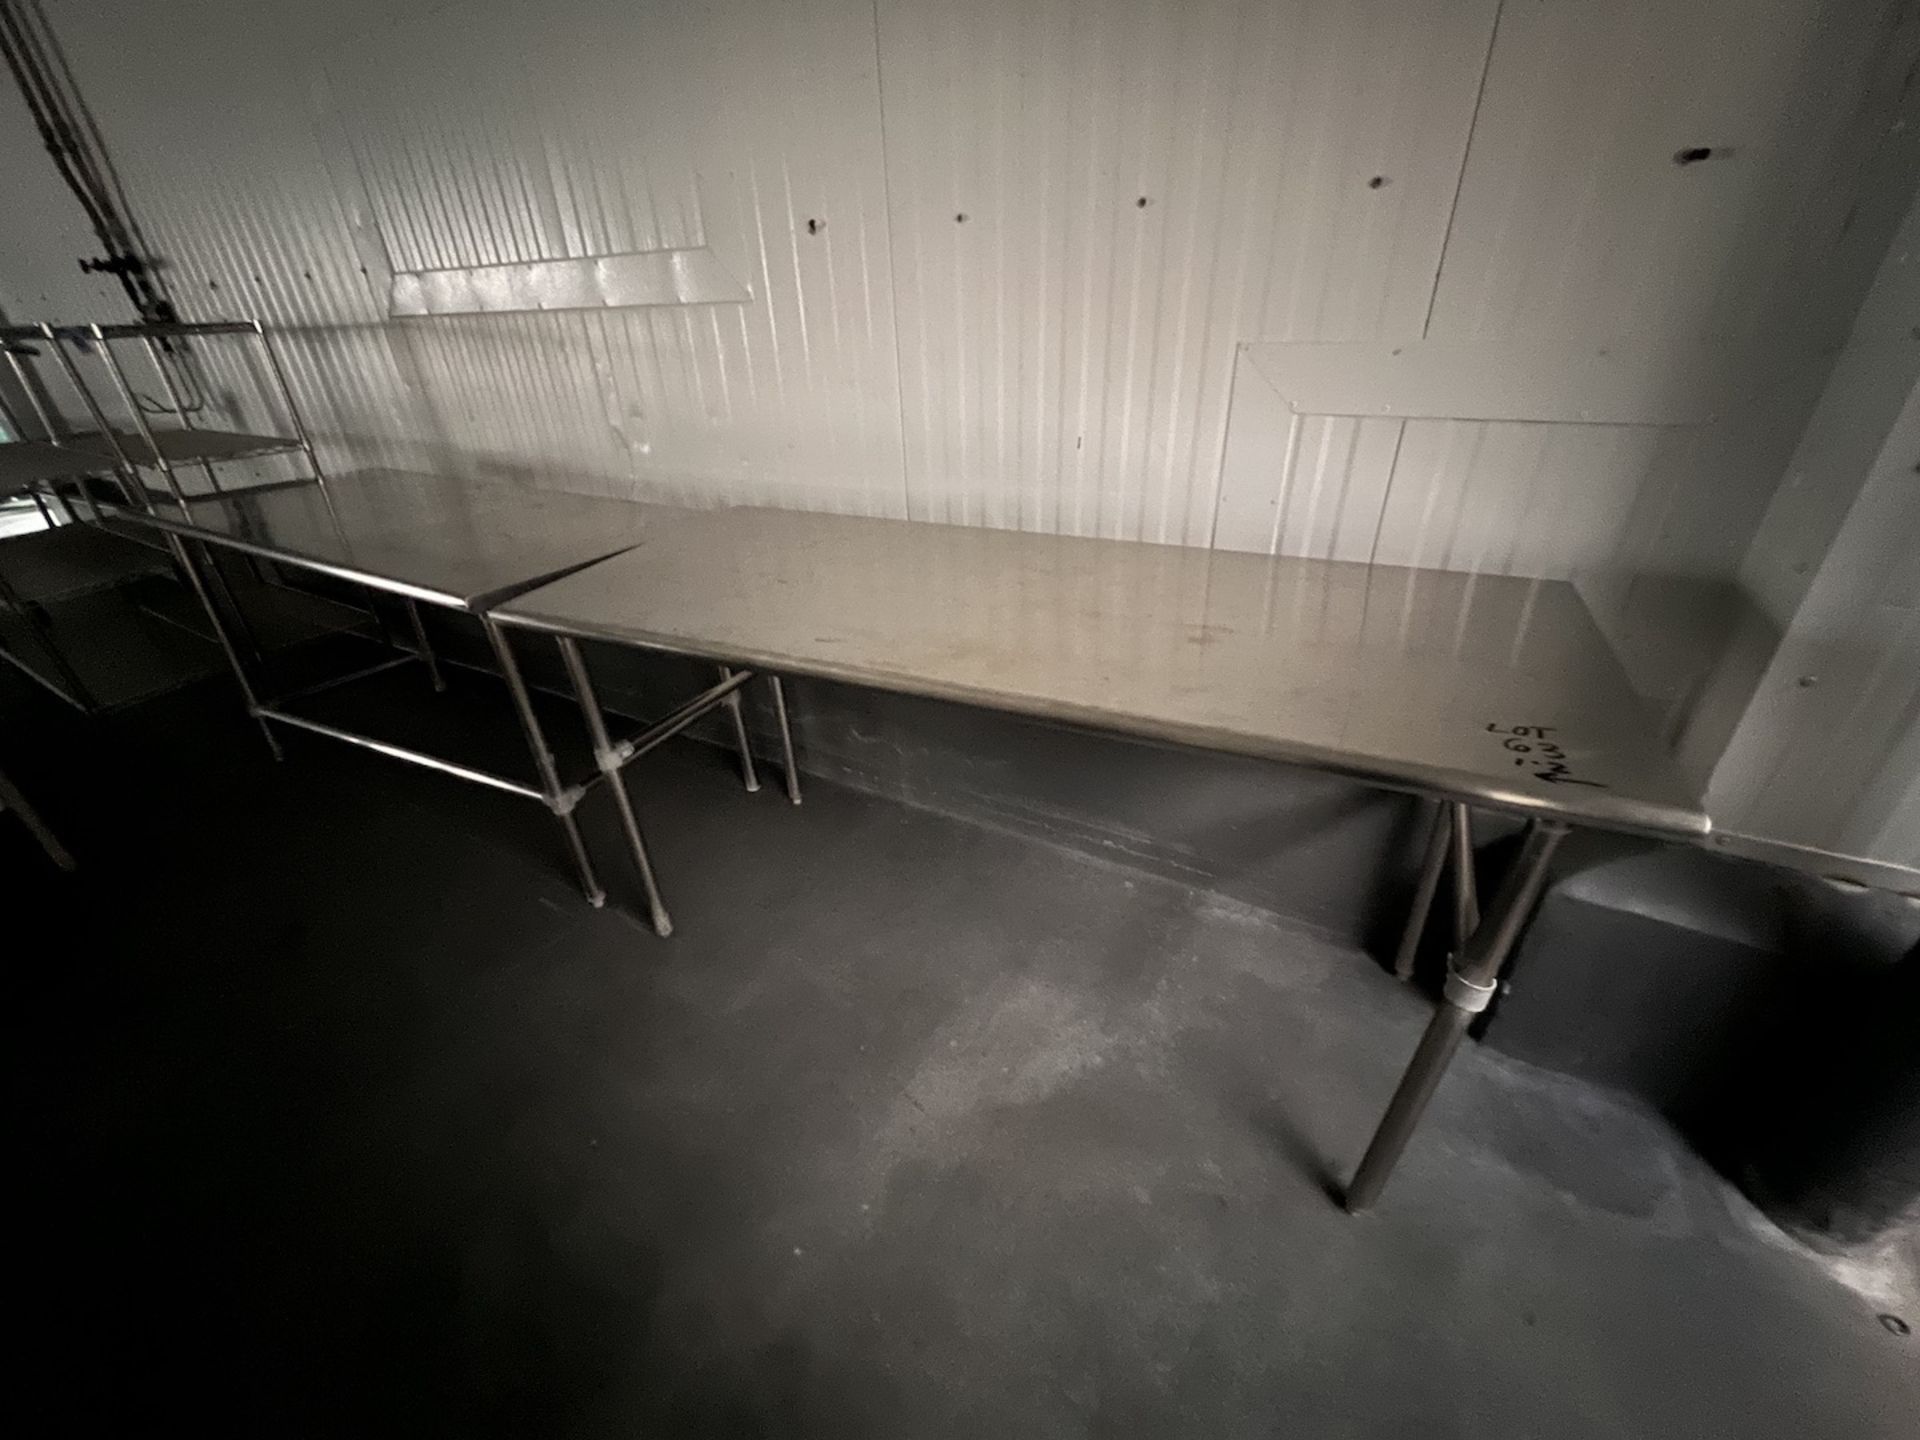 (2) S/S TABLE, APPROX. DIMS: 72 IN X 30 IN (RIGGING & SIMPLE LOADING FEE $40.00) (NOTE: DOES NOT